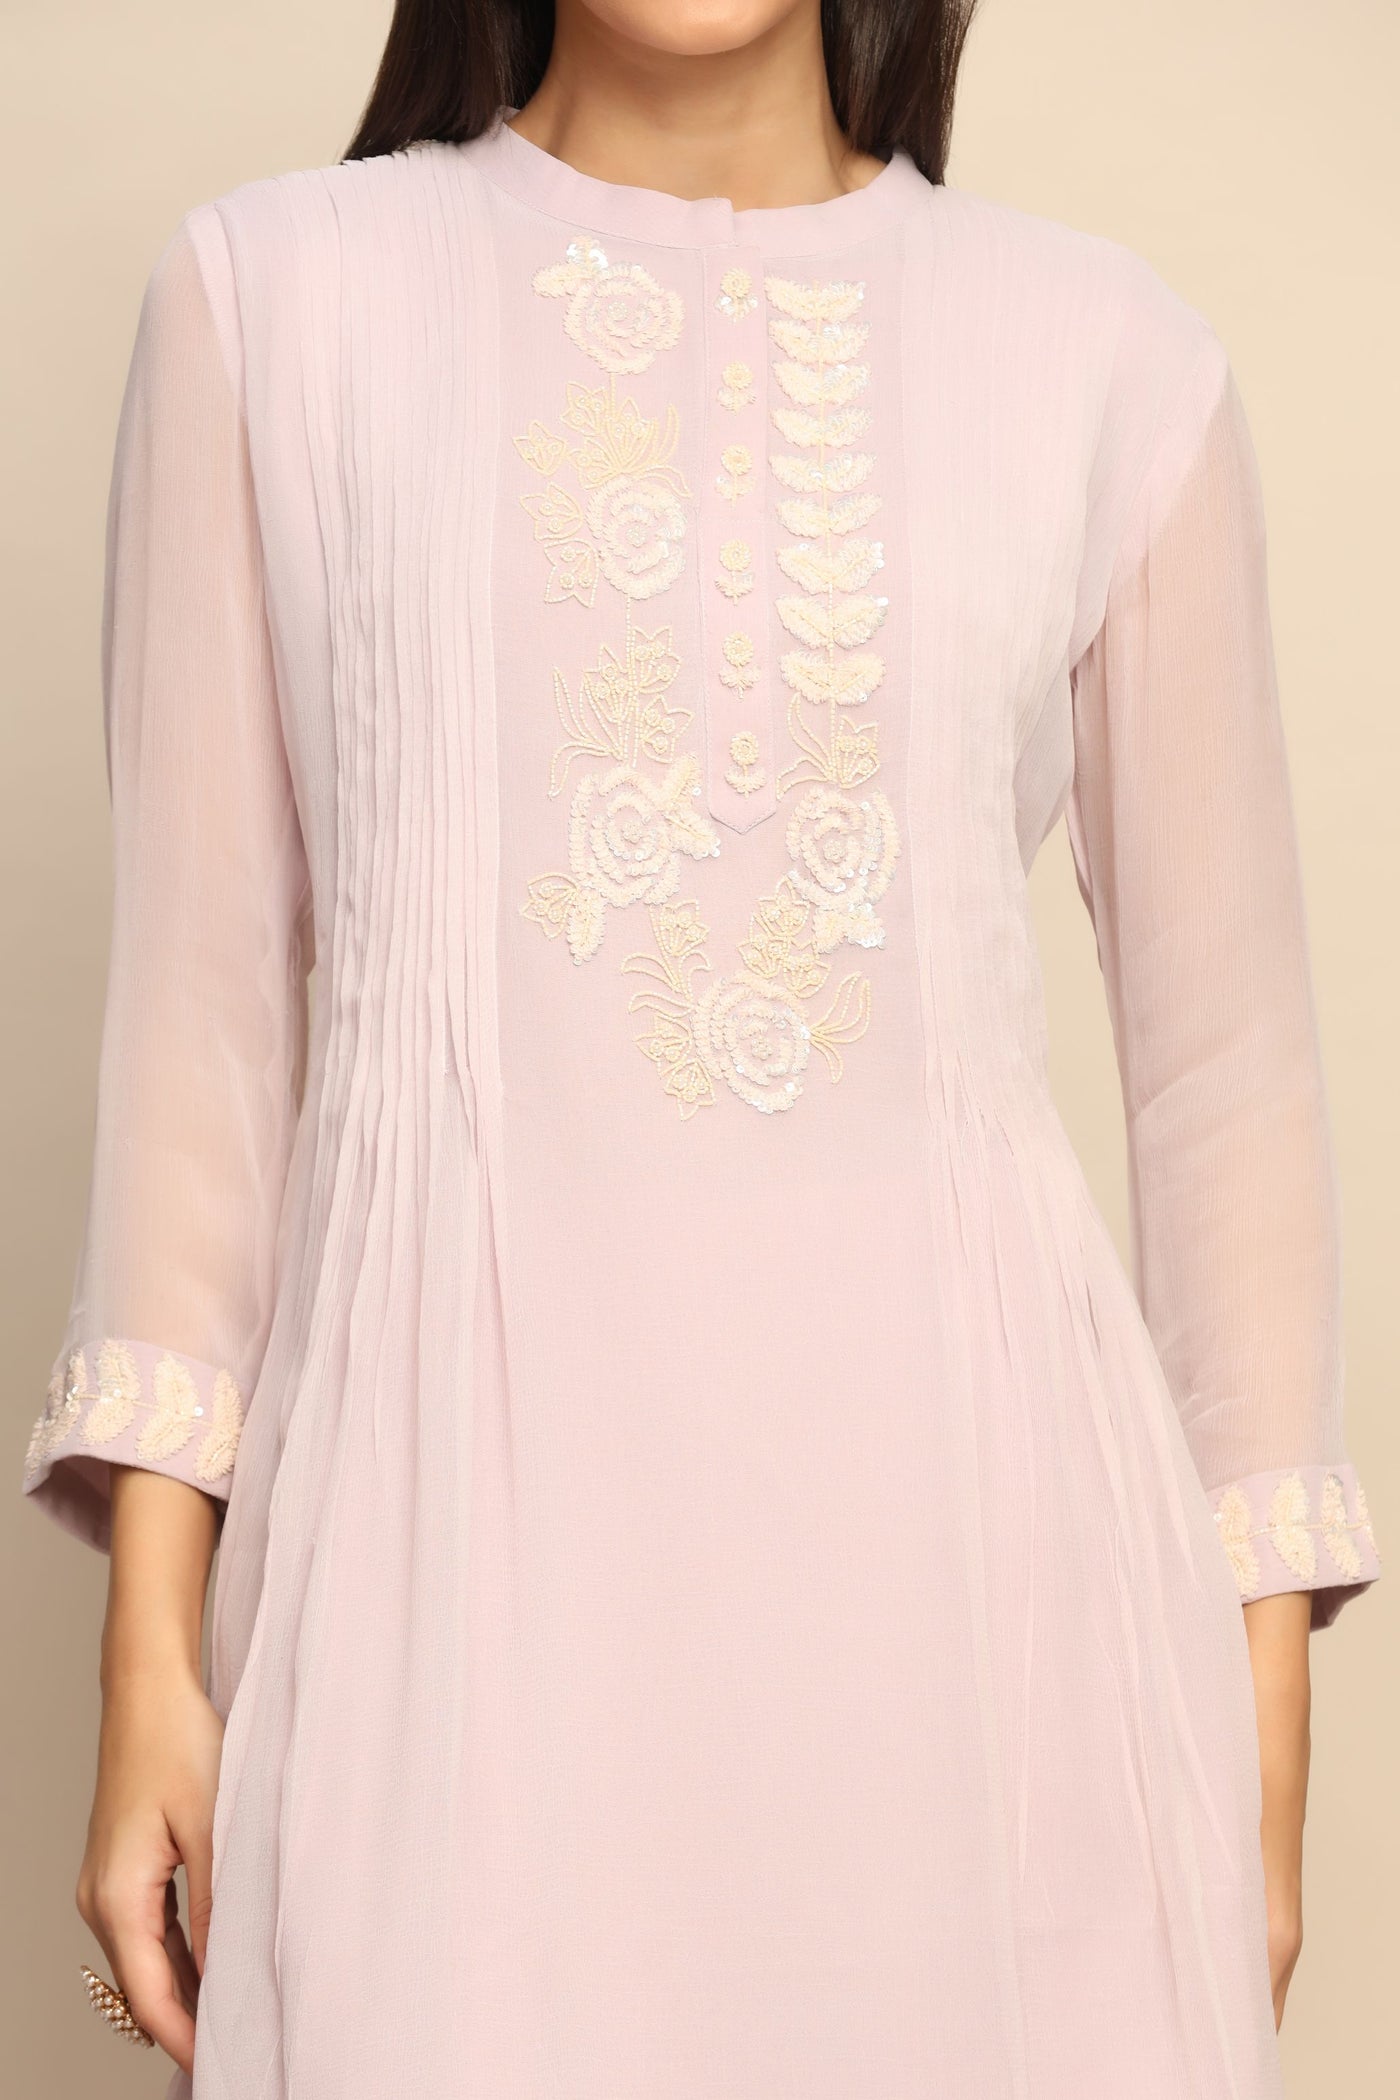 Elegant Baby Pink Dress with Cut Dana, Beads, and Sequins